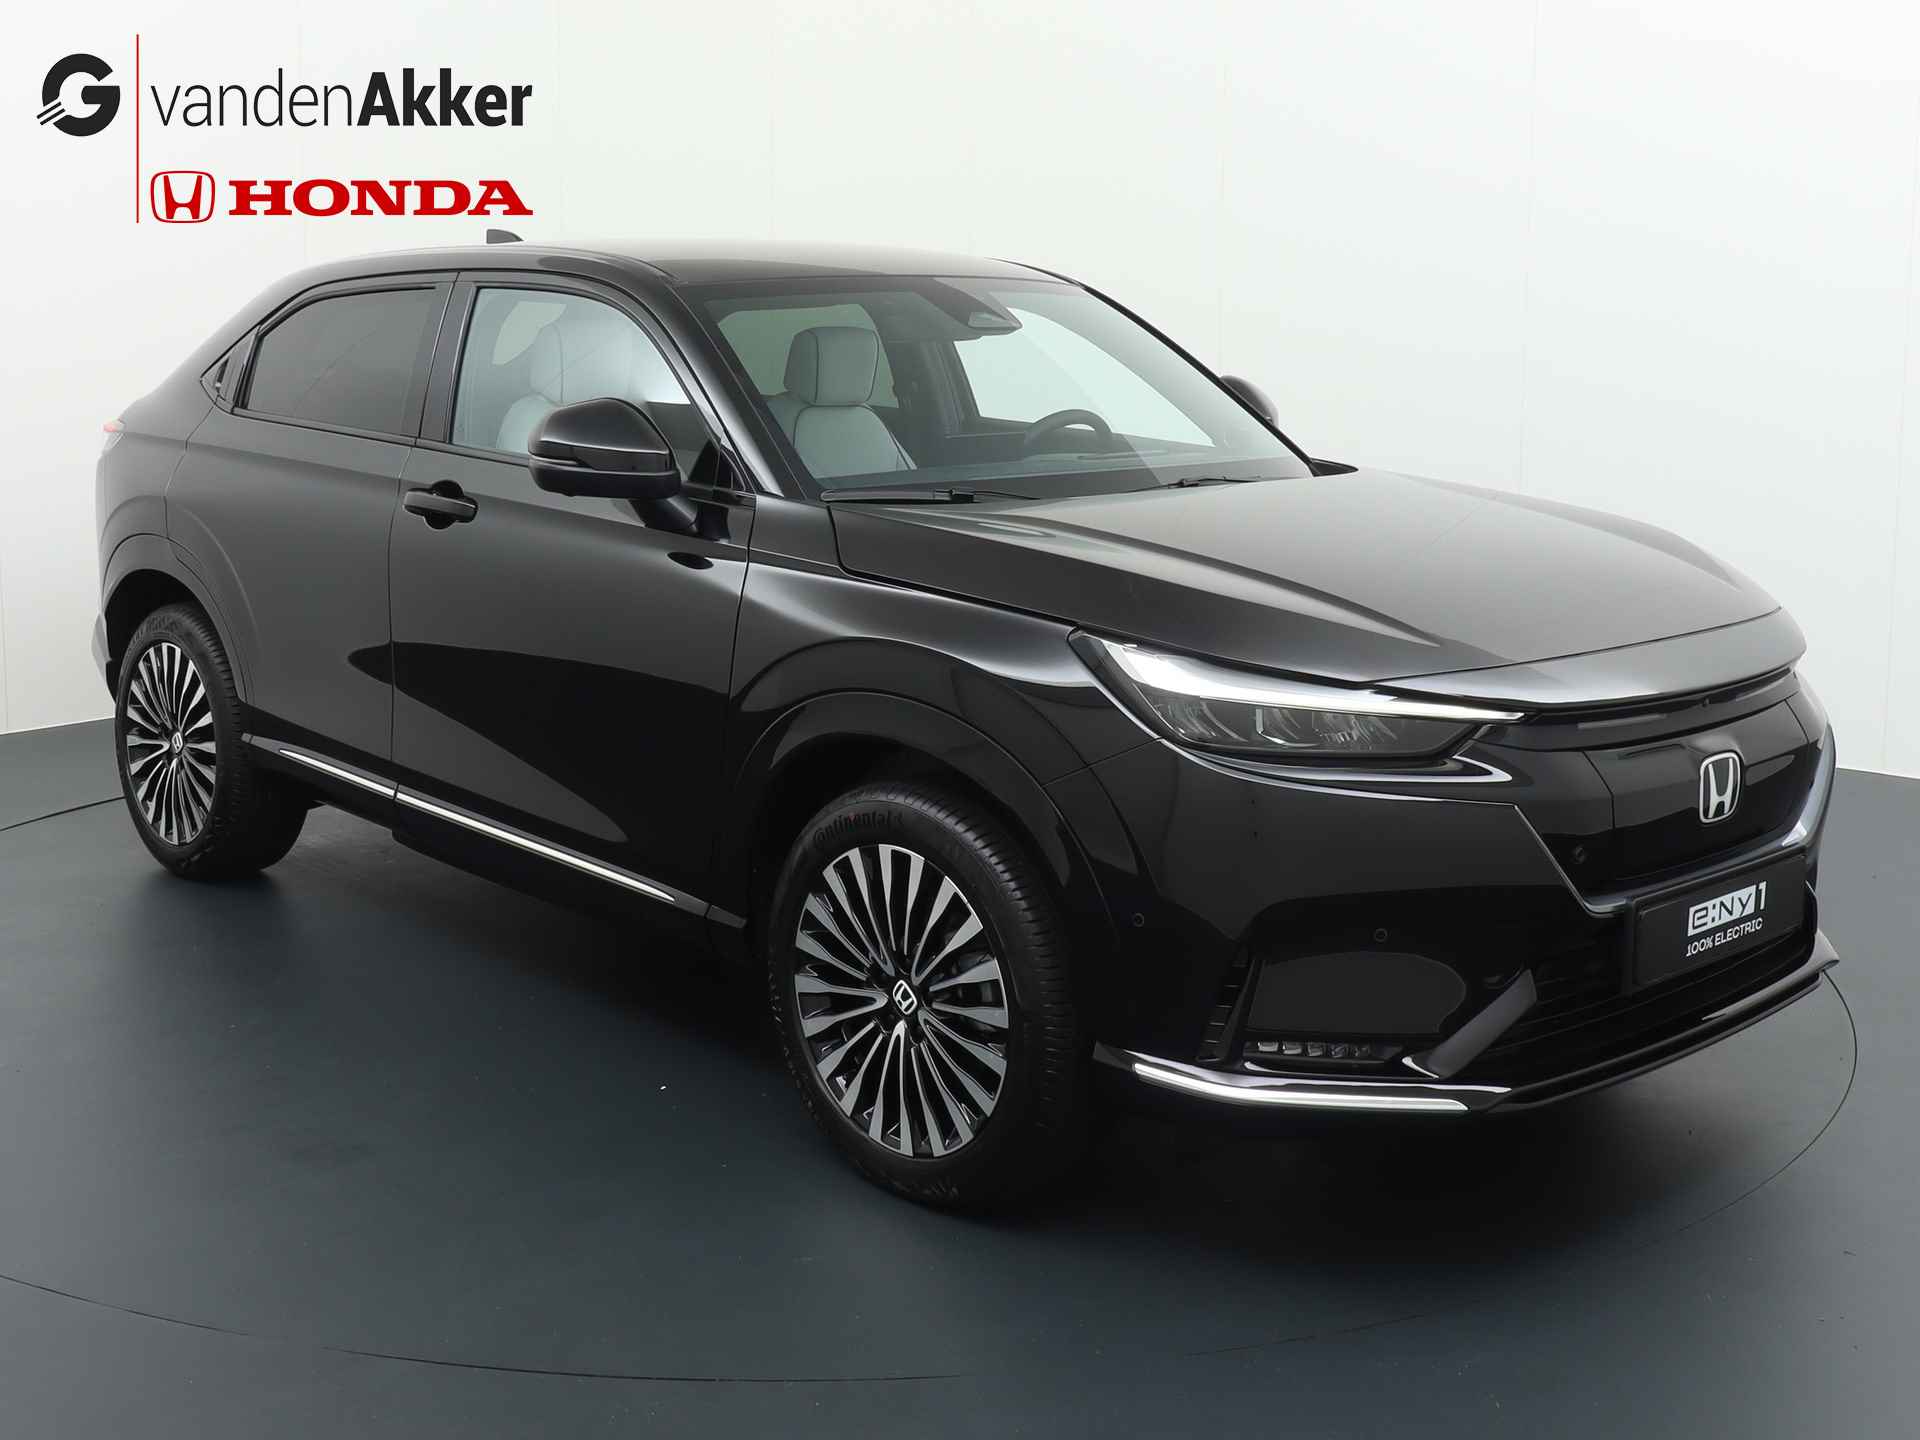 HONDA E:ny1 68,8 kWh 204pk Aut Limited Edition Full Electric Actieprijs € 495,- Private Lease - 8/47